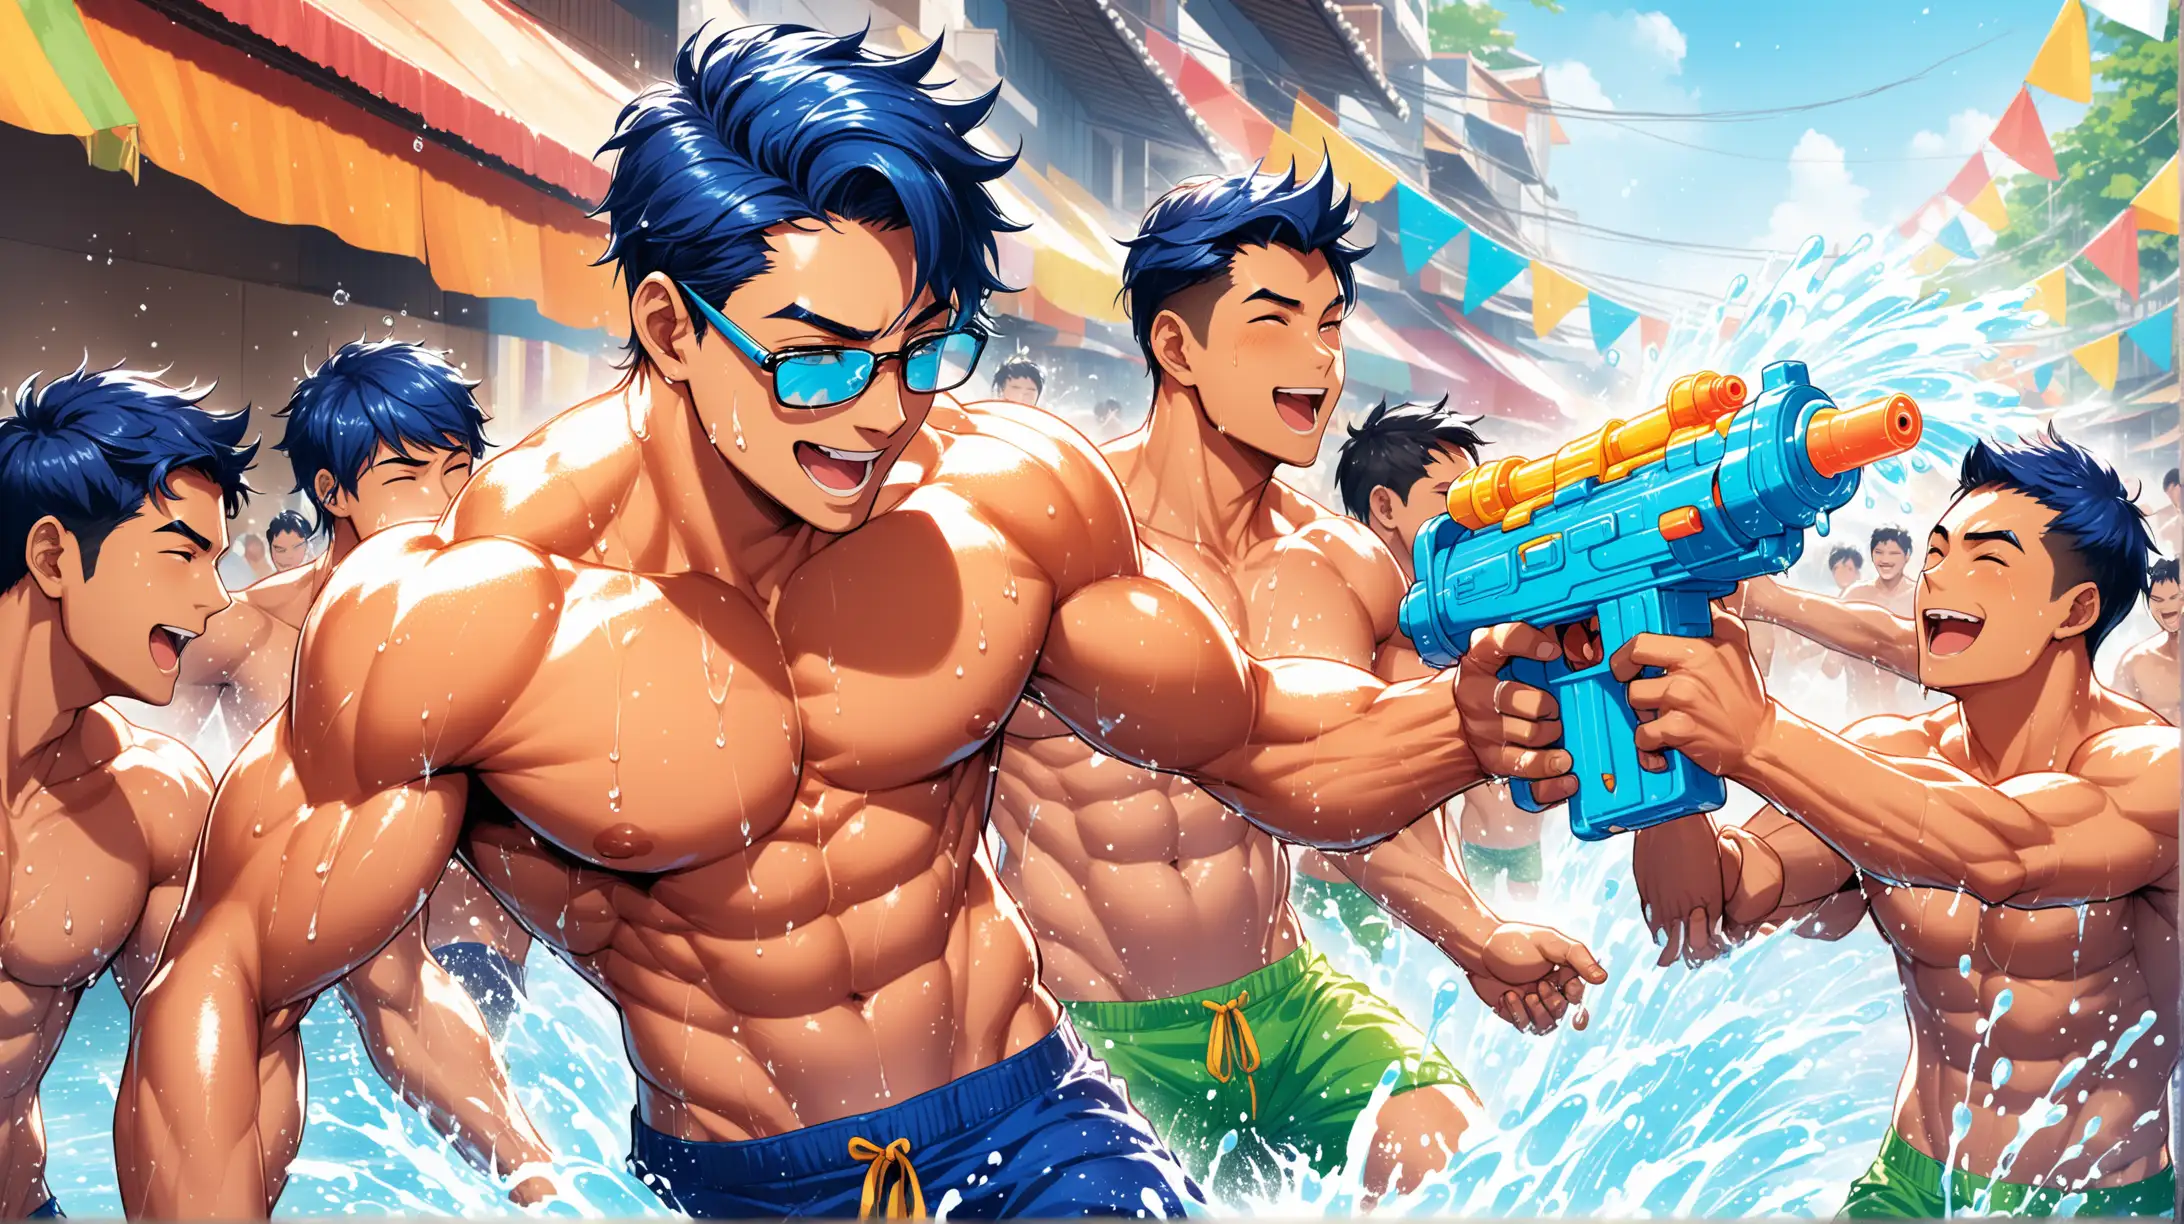 AI drawing prompt: glasses wearing cyborg muscle hunk Lancelot is having a great time in Songkran festival. His aquamarine eyes glowing, short navy blue hair damped, shirtless body glistening as all the hot gay men around him are shooting water against each other on the streets of Bangkok.

Lancelot's shirtless physique glistens under the sunlight, his muscular frame highlighted by the droplets of water clinging to his skin. With a water gun in hand, he joins in the playful chaos, engaging in spirited water fights with the other festival-goers.All around him, Thai hunks laugh and shout as they drench each other with water, their faces lit up with joy and camaraderie. The streets are alive with the sounds of splashing water and cheerful banter, creating a vibrant and energetic atmosphere.